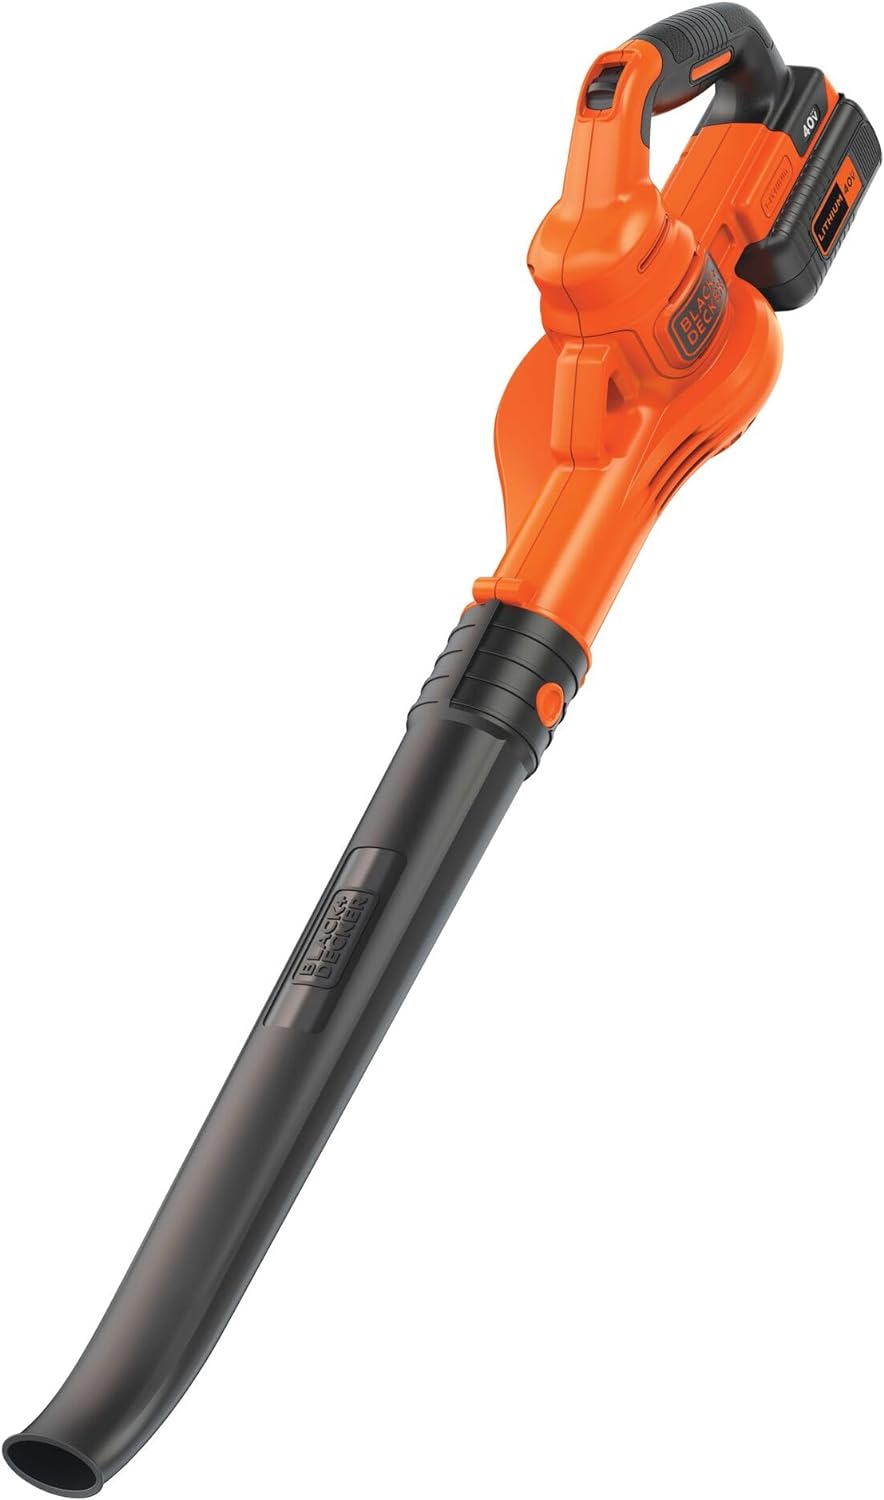 BLACK+DECKER 40V MAX Cordless Leaf Blower, Lawn Sweeper, Battery and Charger Included- $60